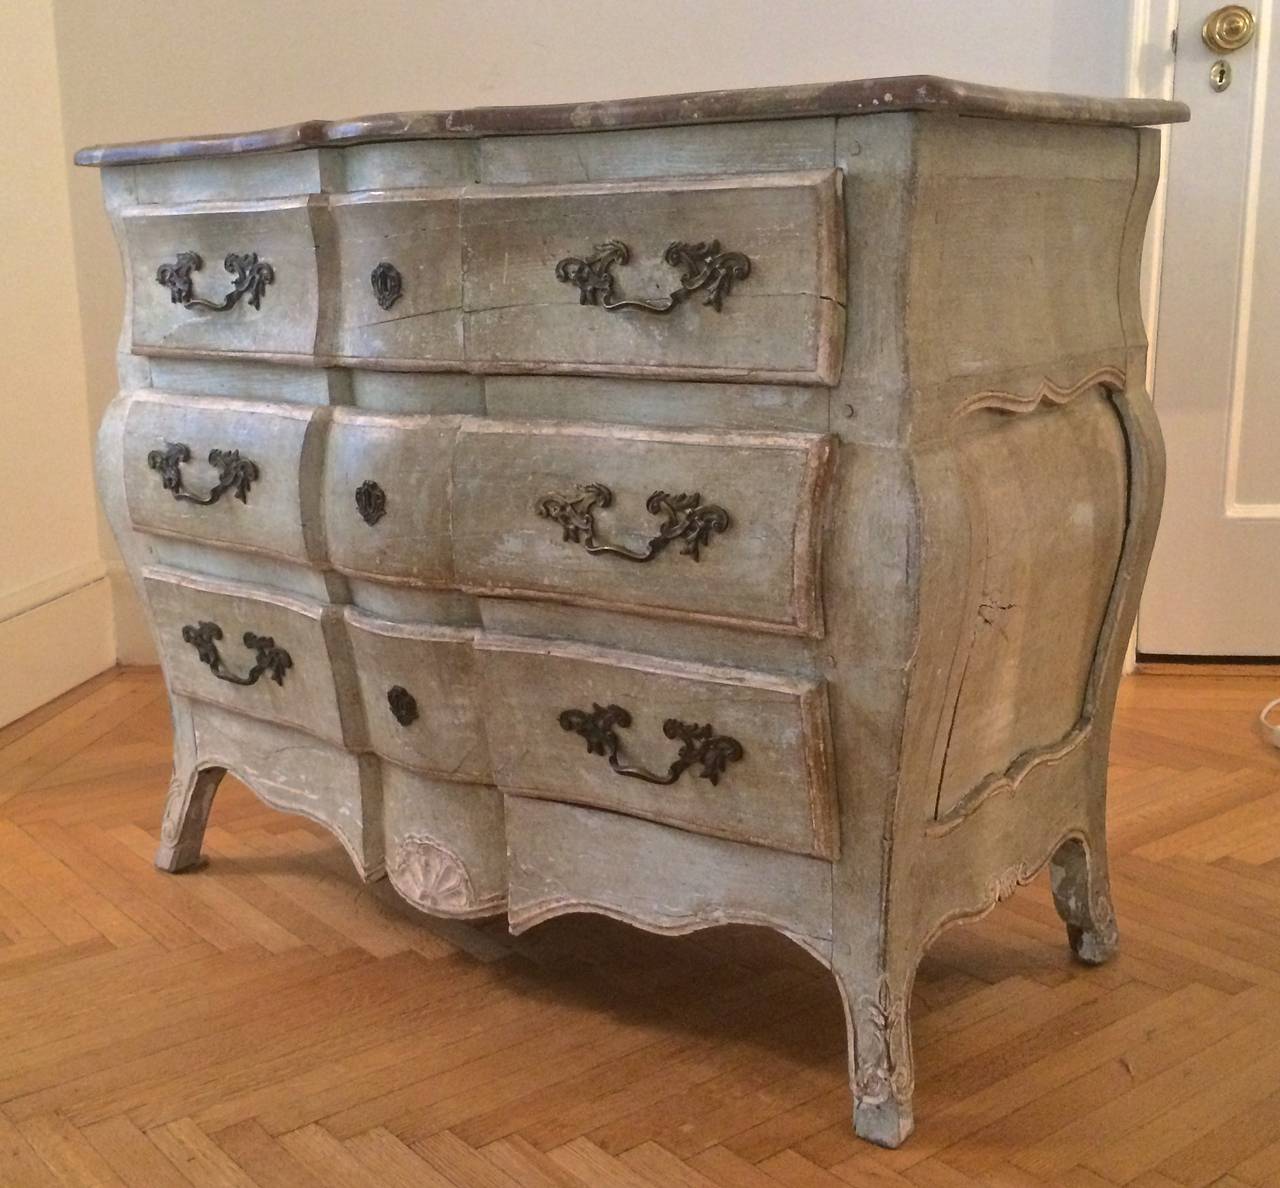 Louis XV Commode en Tombeau
France
18th century
Red and white serpentine faux-painted wood top; pale green painted bombe-shaped body; three paneled drawers and a conformingly-shaped apron; the whole form is raised on short stylized “pied de